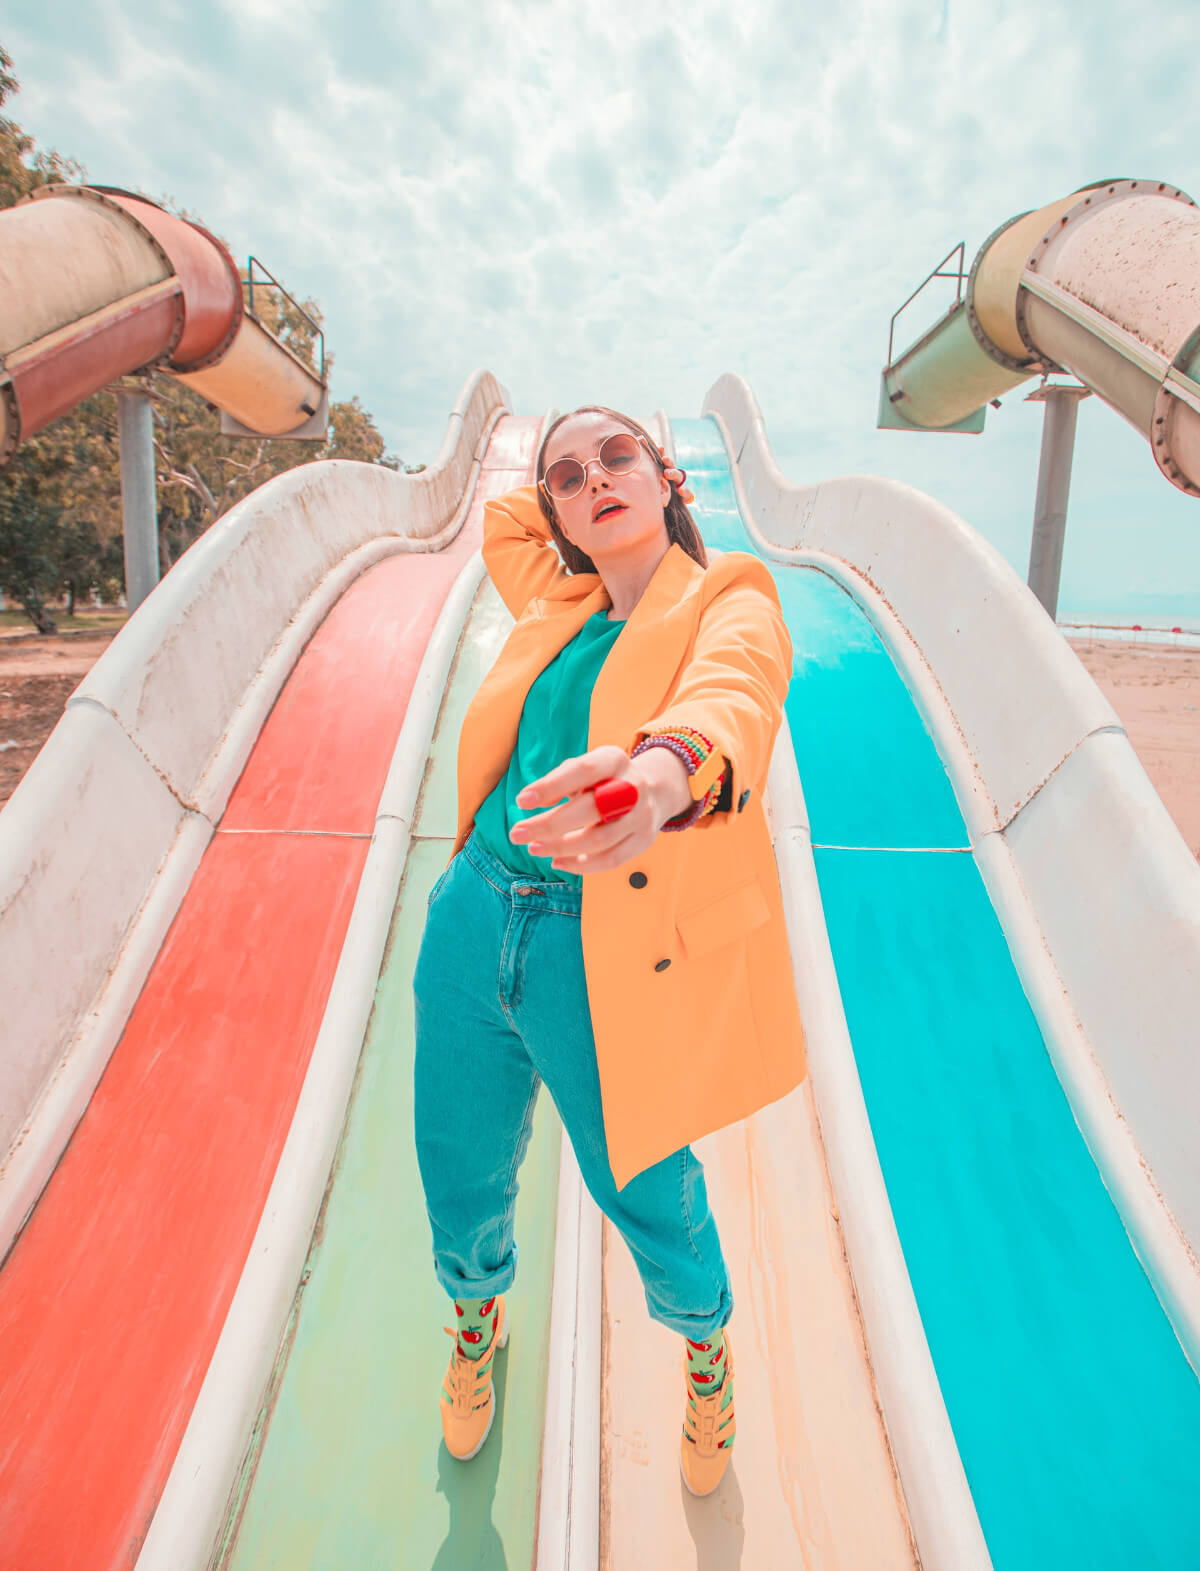 5. A fashionable woman poses in an abandoned water park!